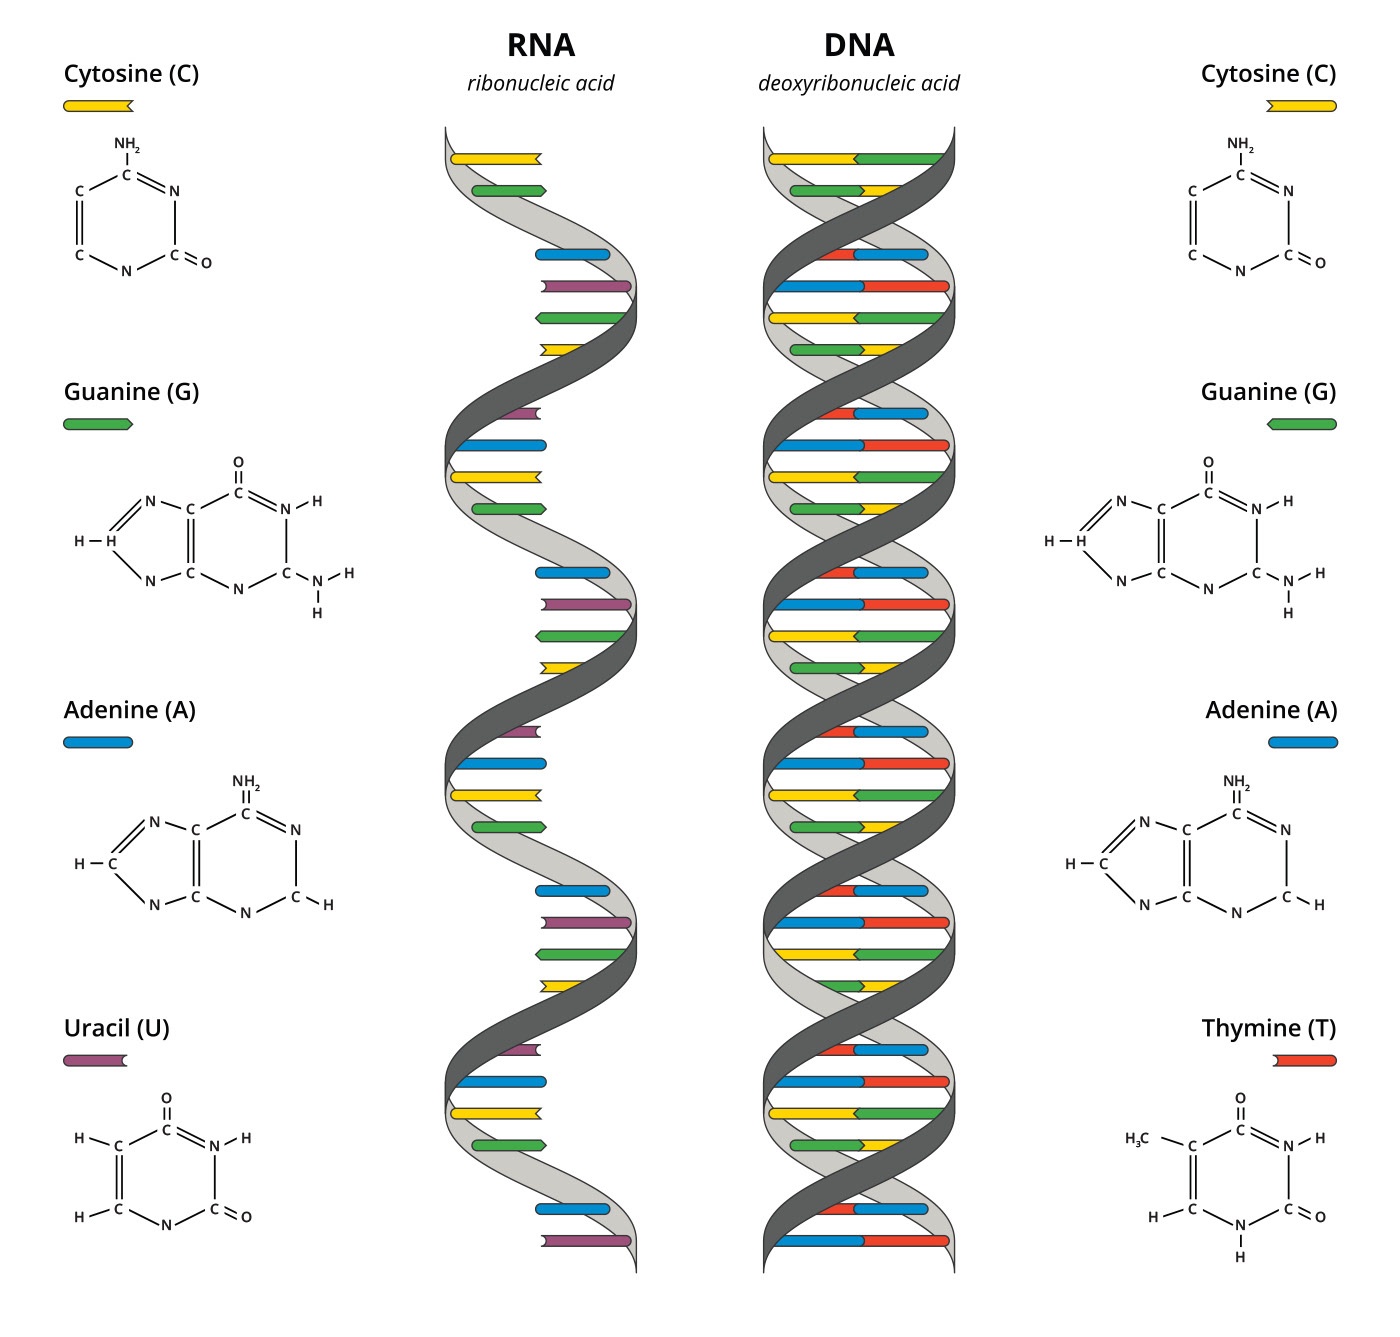 Illustration of RNA and DNA structural composition